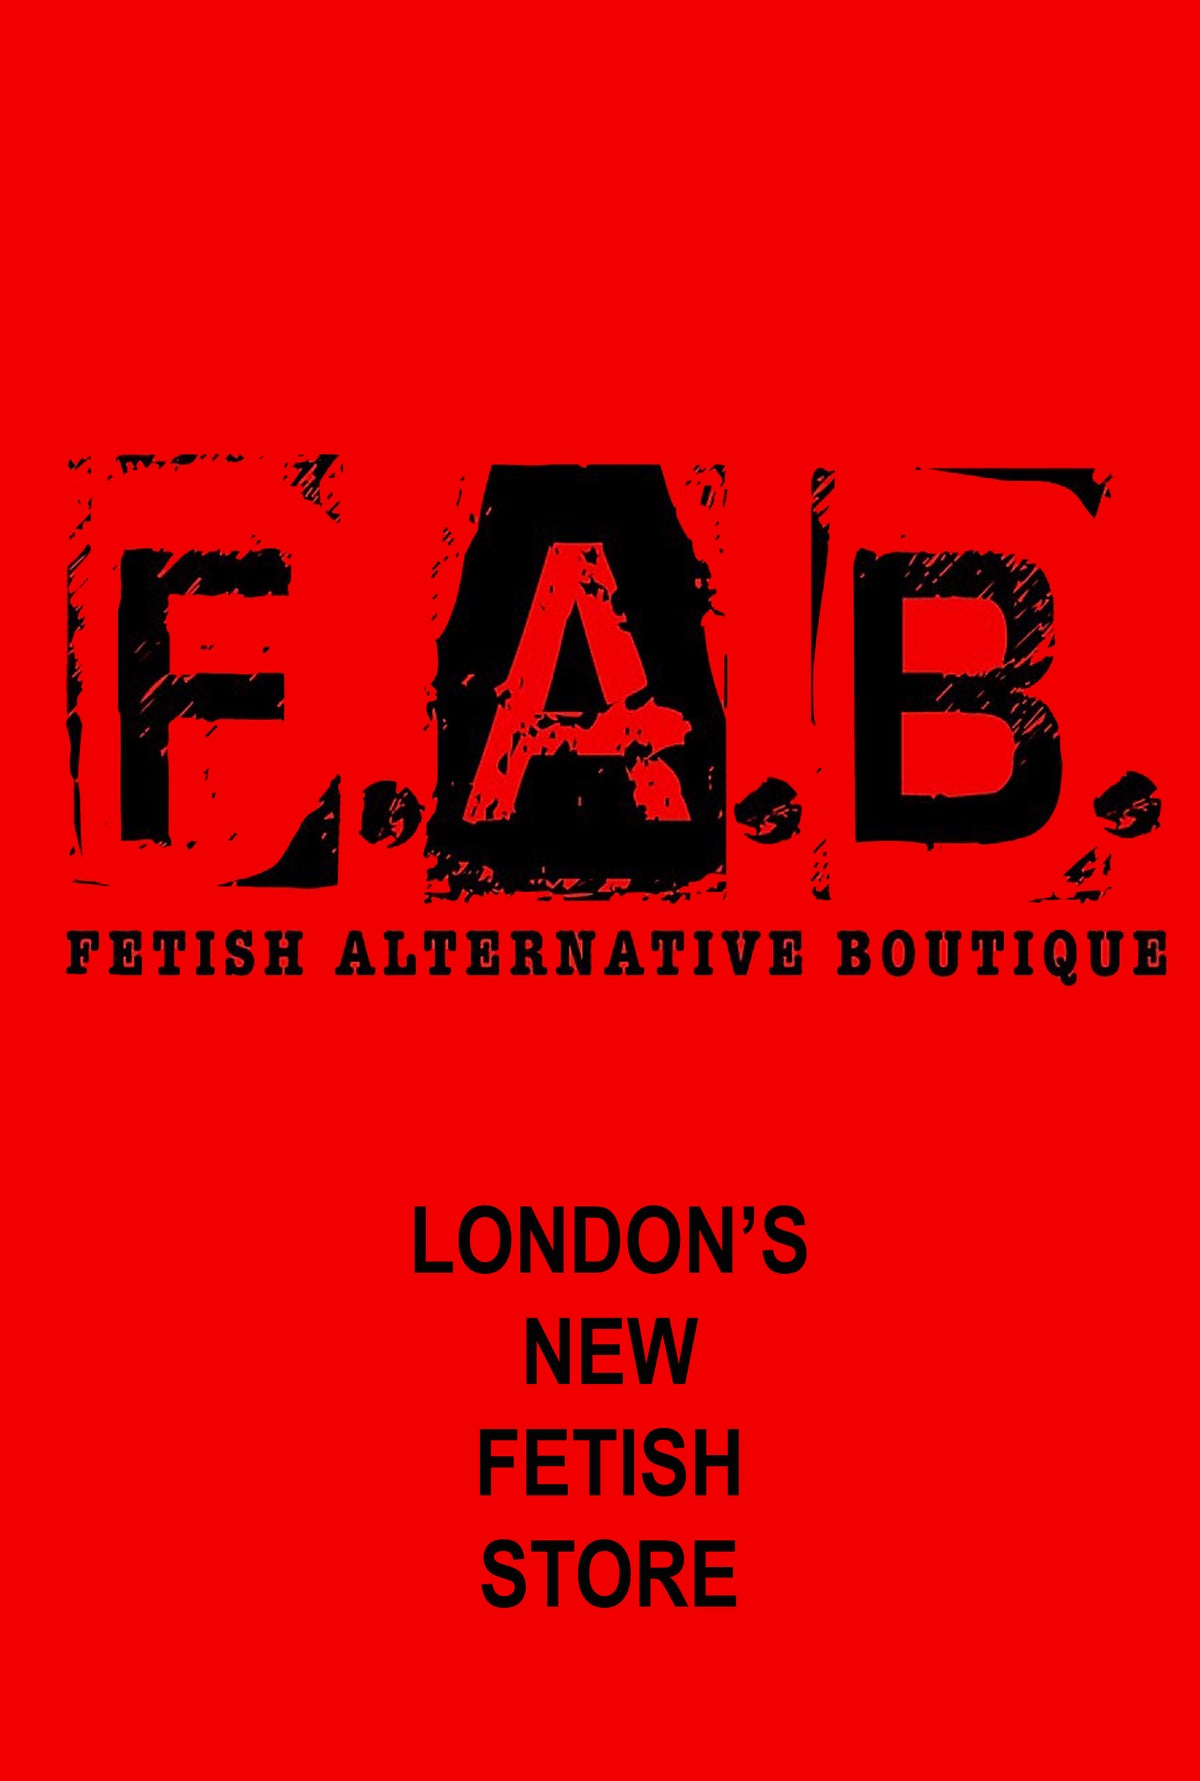 NOW AVAILABLE IN F.A.B. CAMDEN